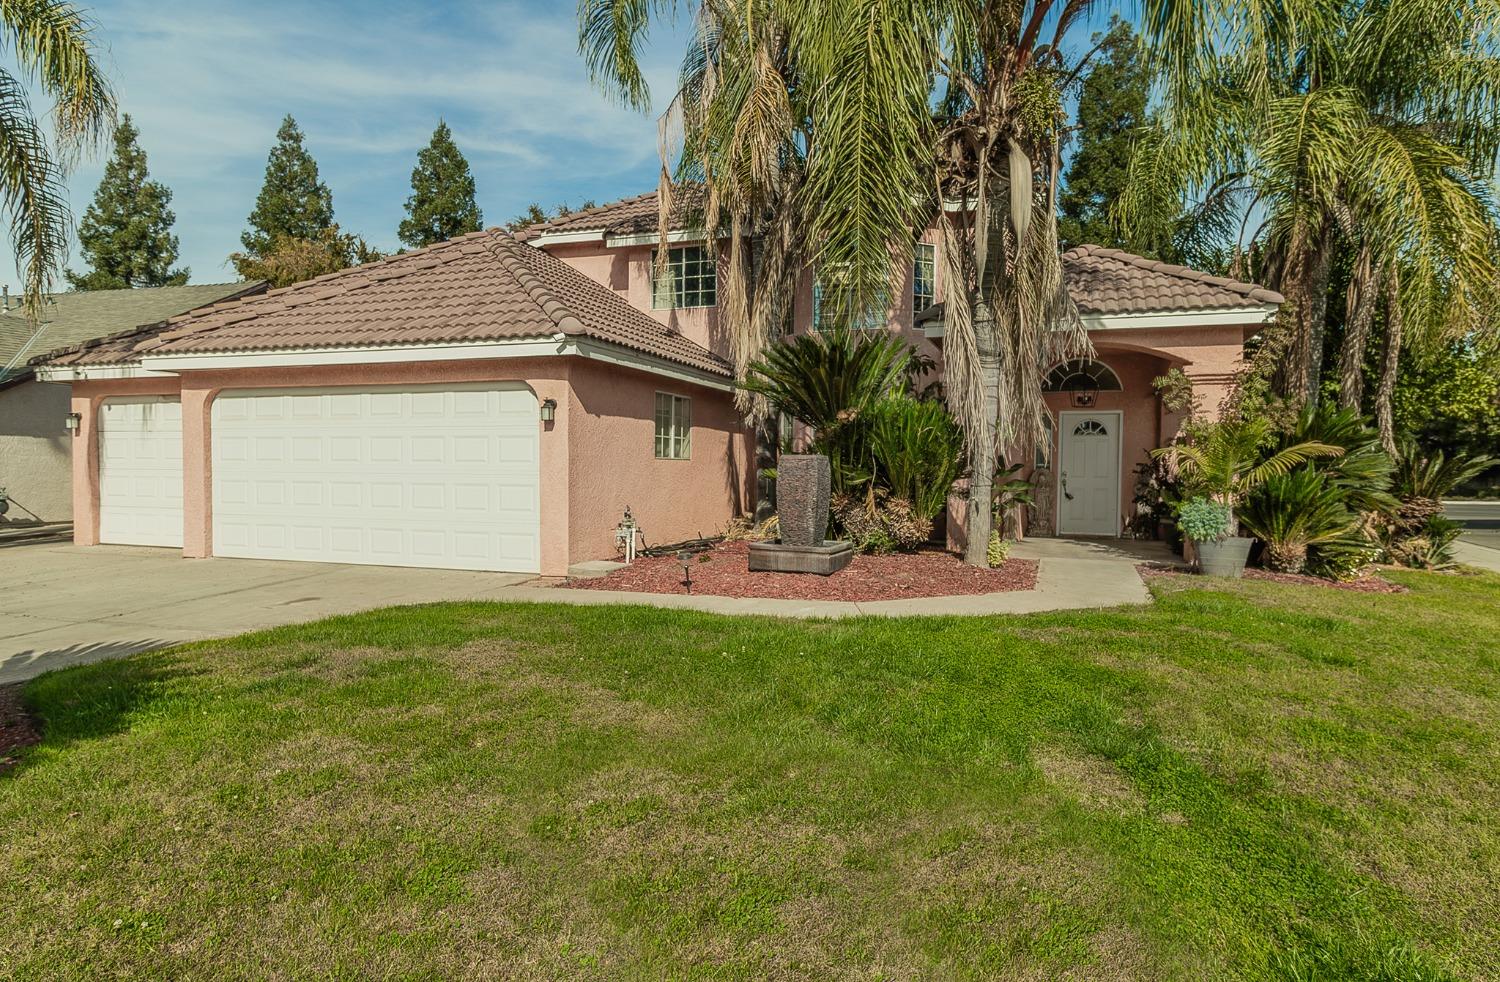 Photo of 6326 N Selland Ave in Fresno, CA